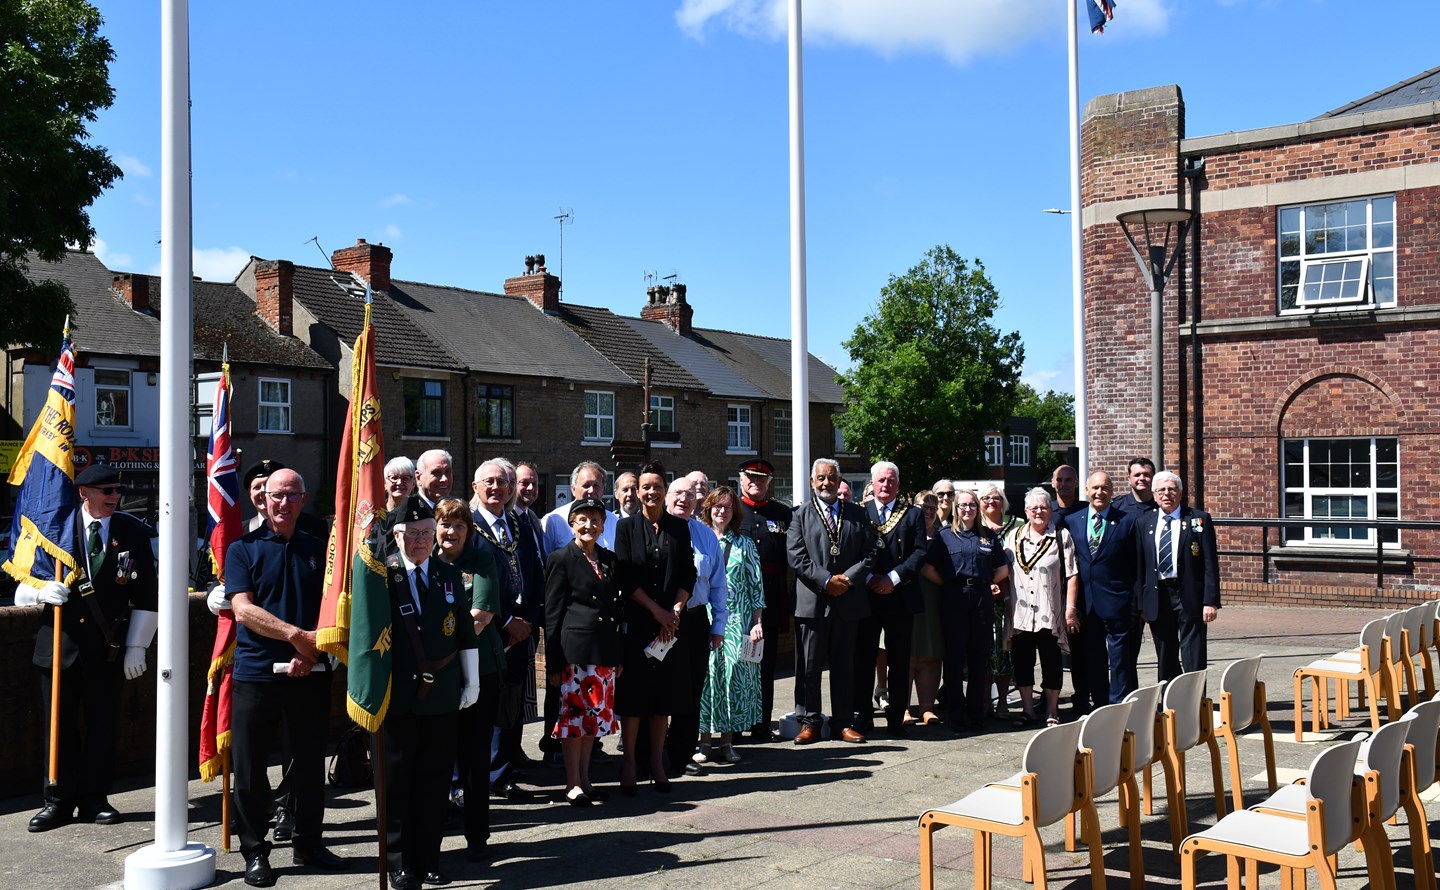 The Armed Forces Day flag is raised